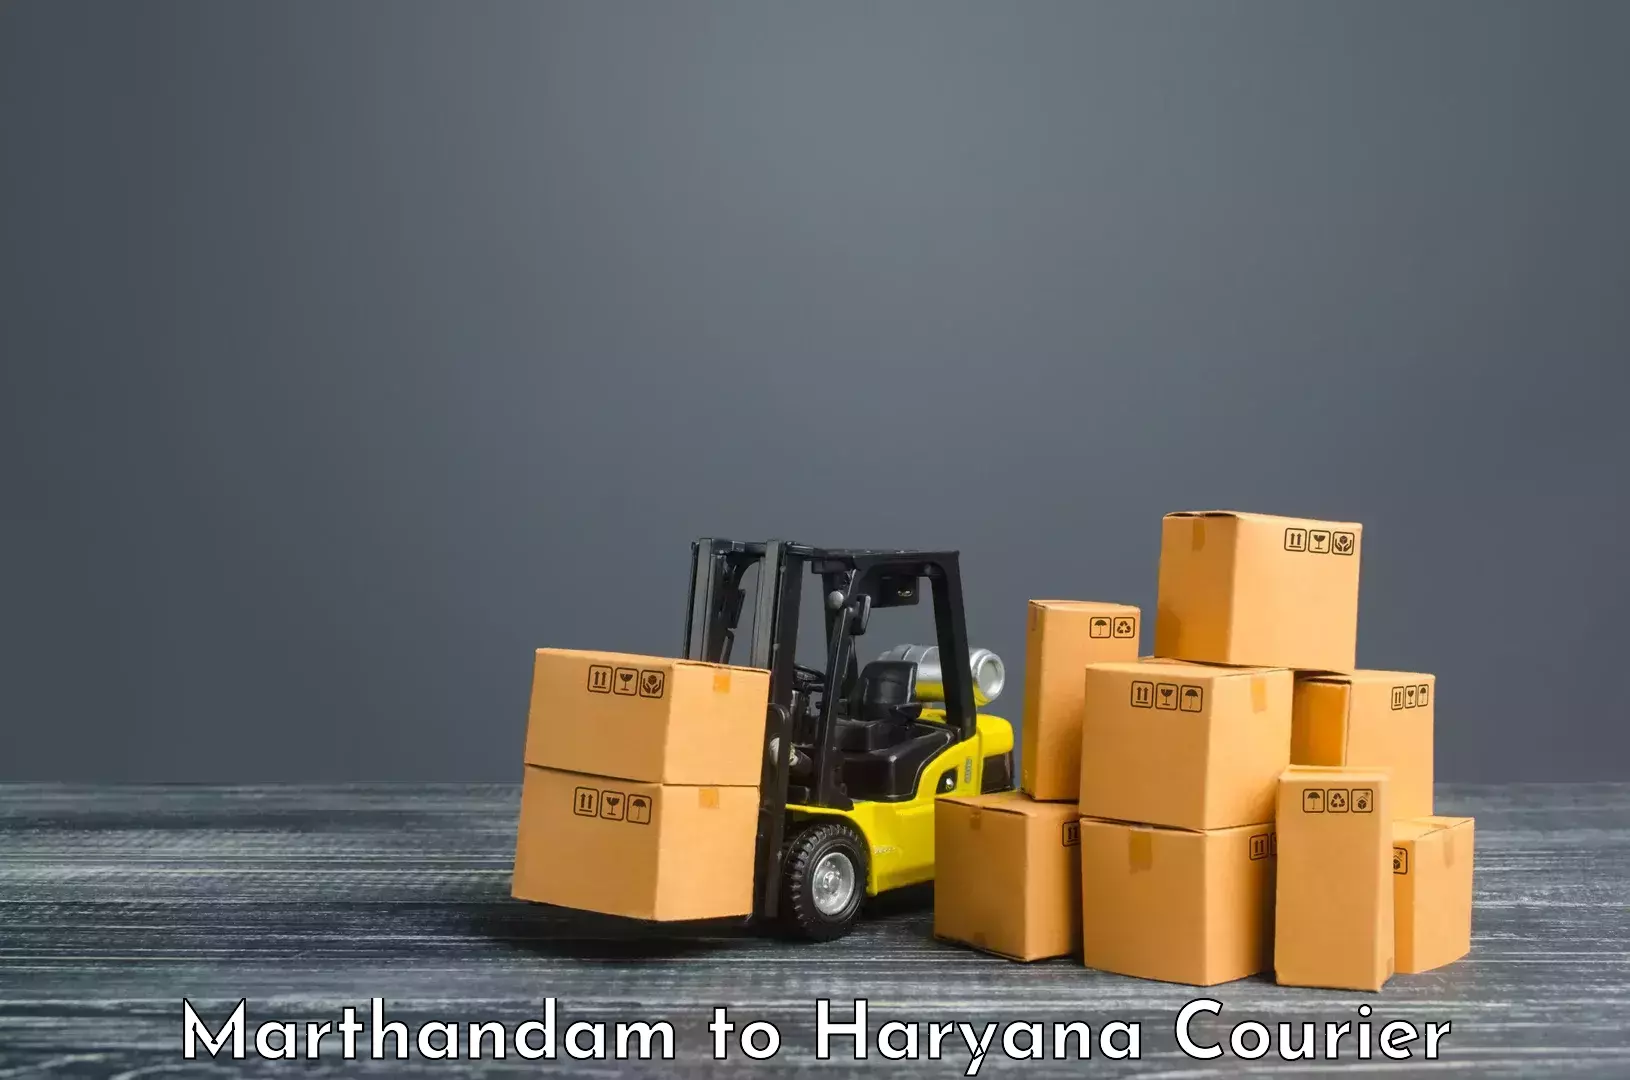 High-priority parcel service Marthandam to Odhan